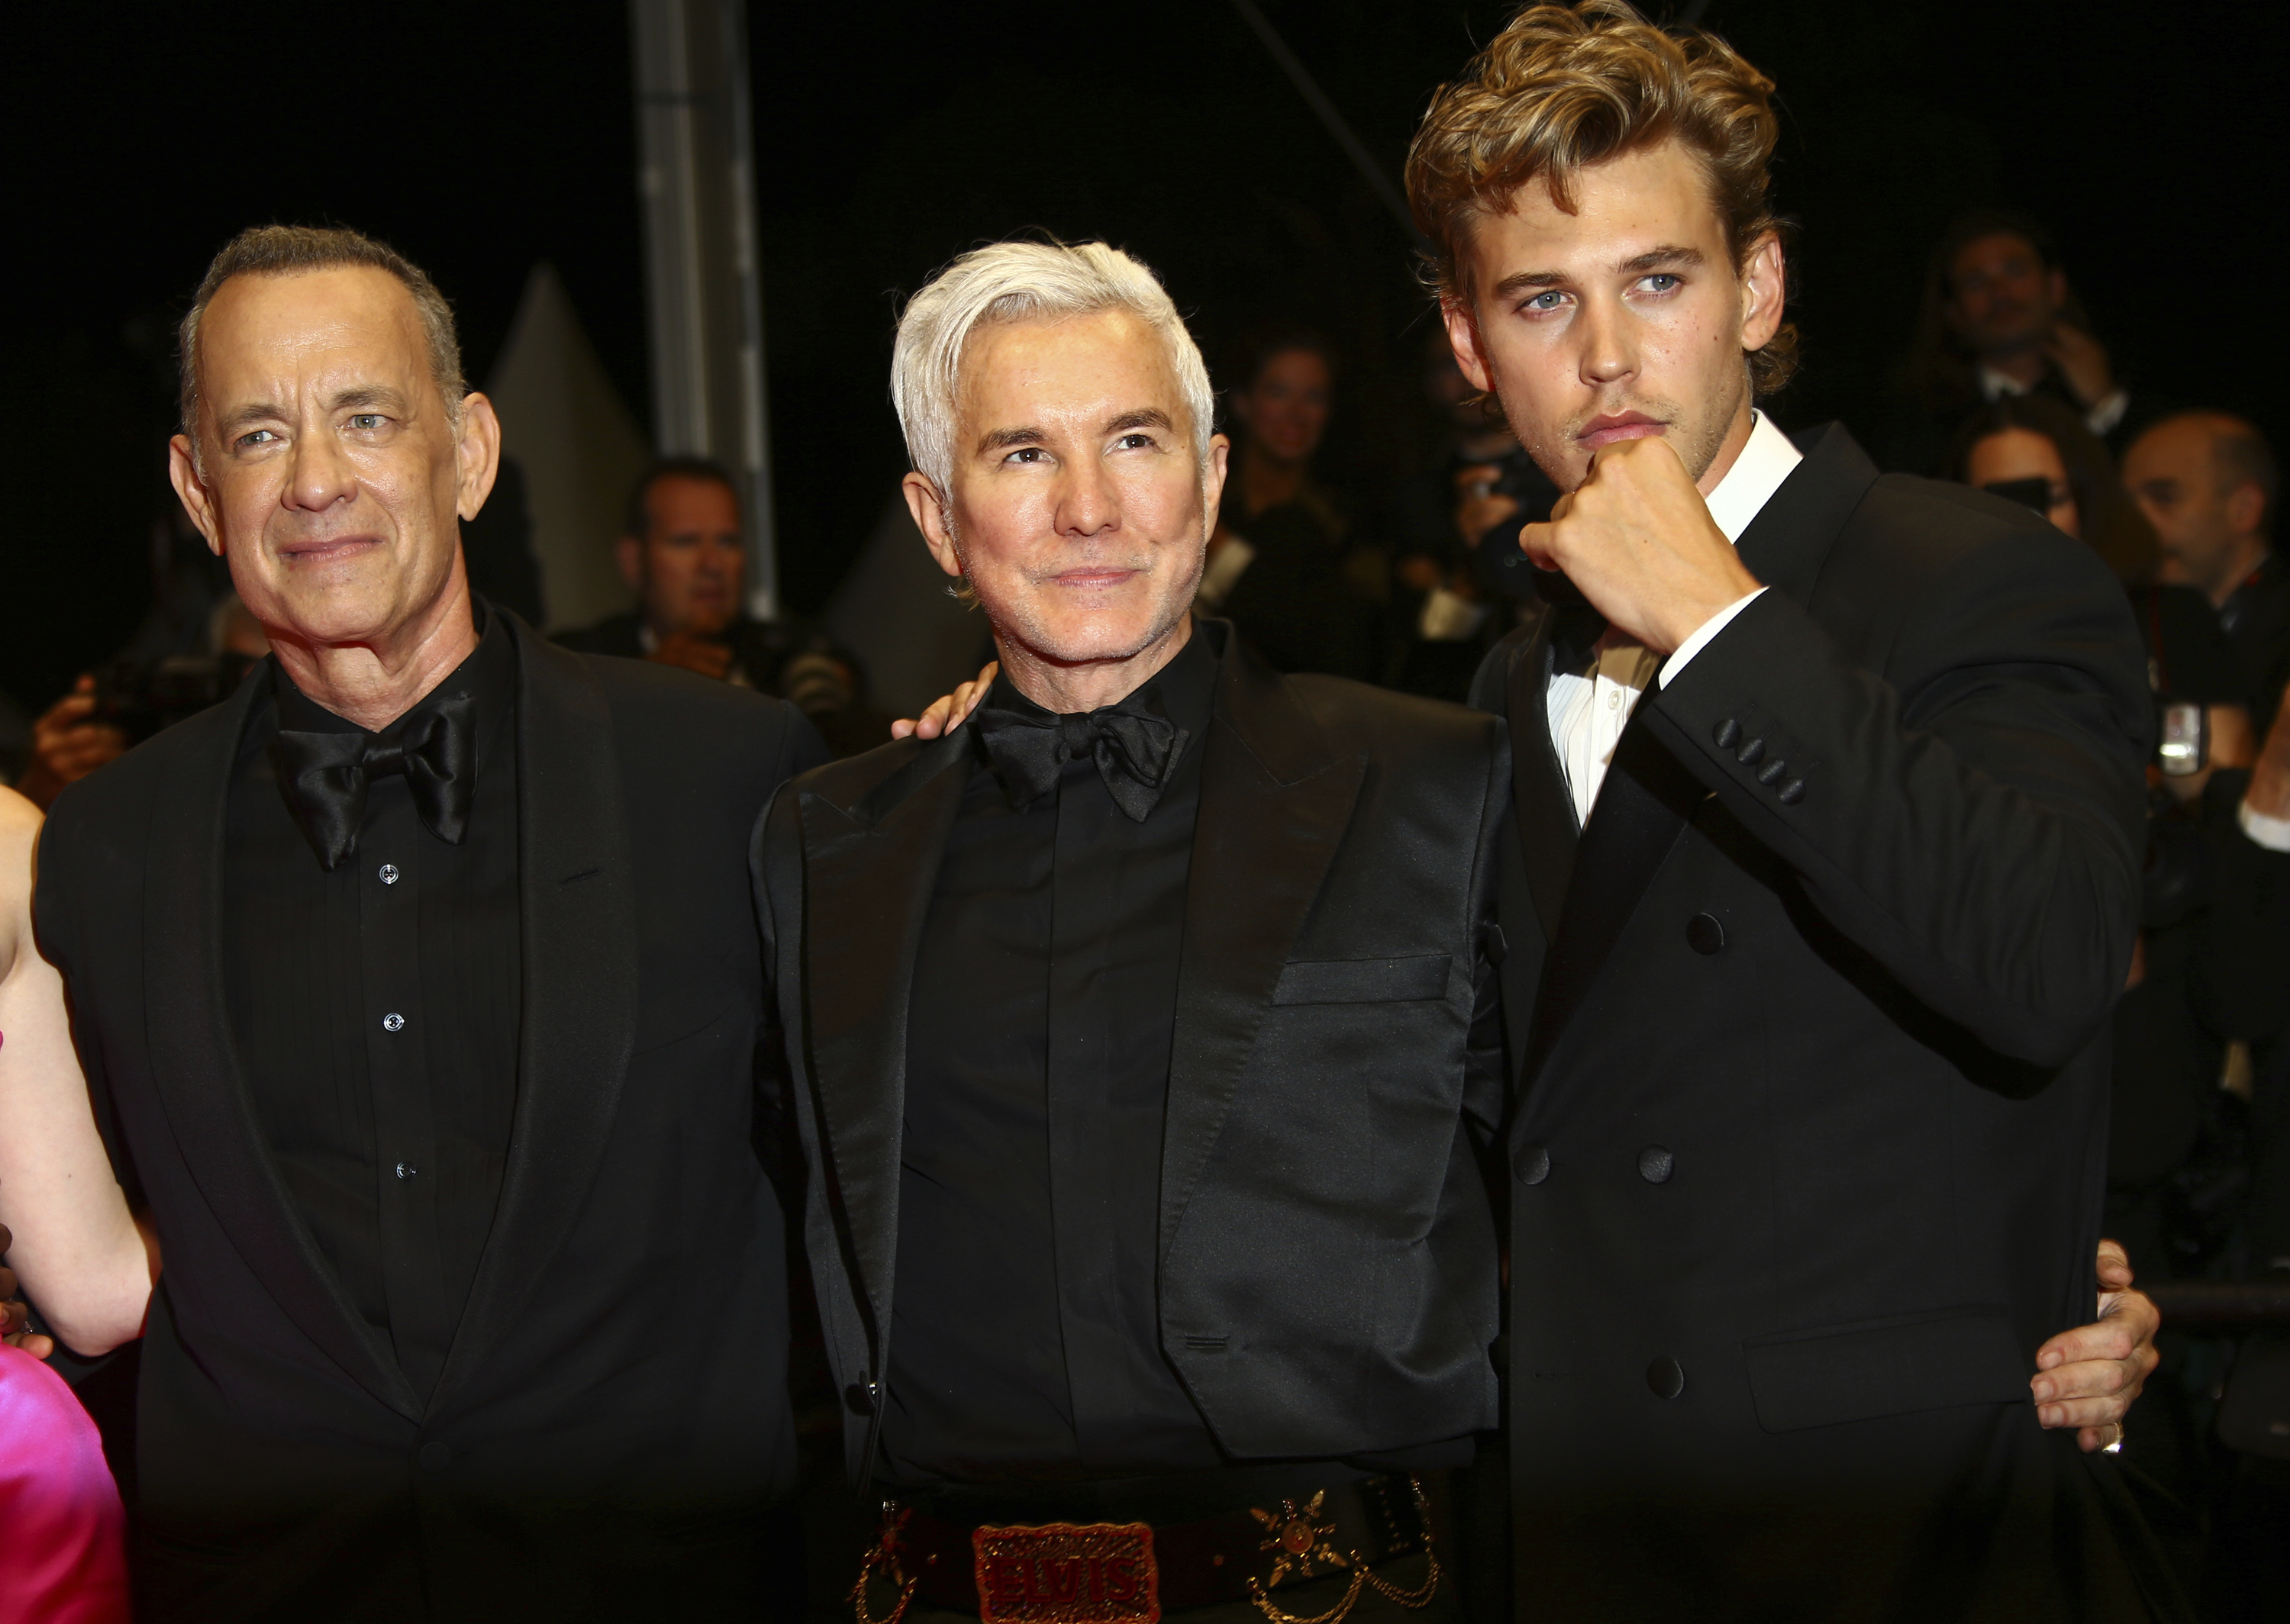 Tom Hanks, from left, Baz Luhrmann, and Austin Butler pose for photographers upon departure from the premiere of the film 'Elvis' at the 75th international film festival, Cannes, southern France, Wednesday, May 25, 2022. (Photo by Joel C Ryan/Invision/AP)